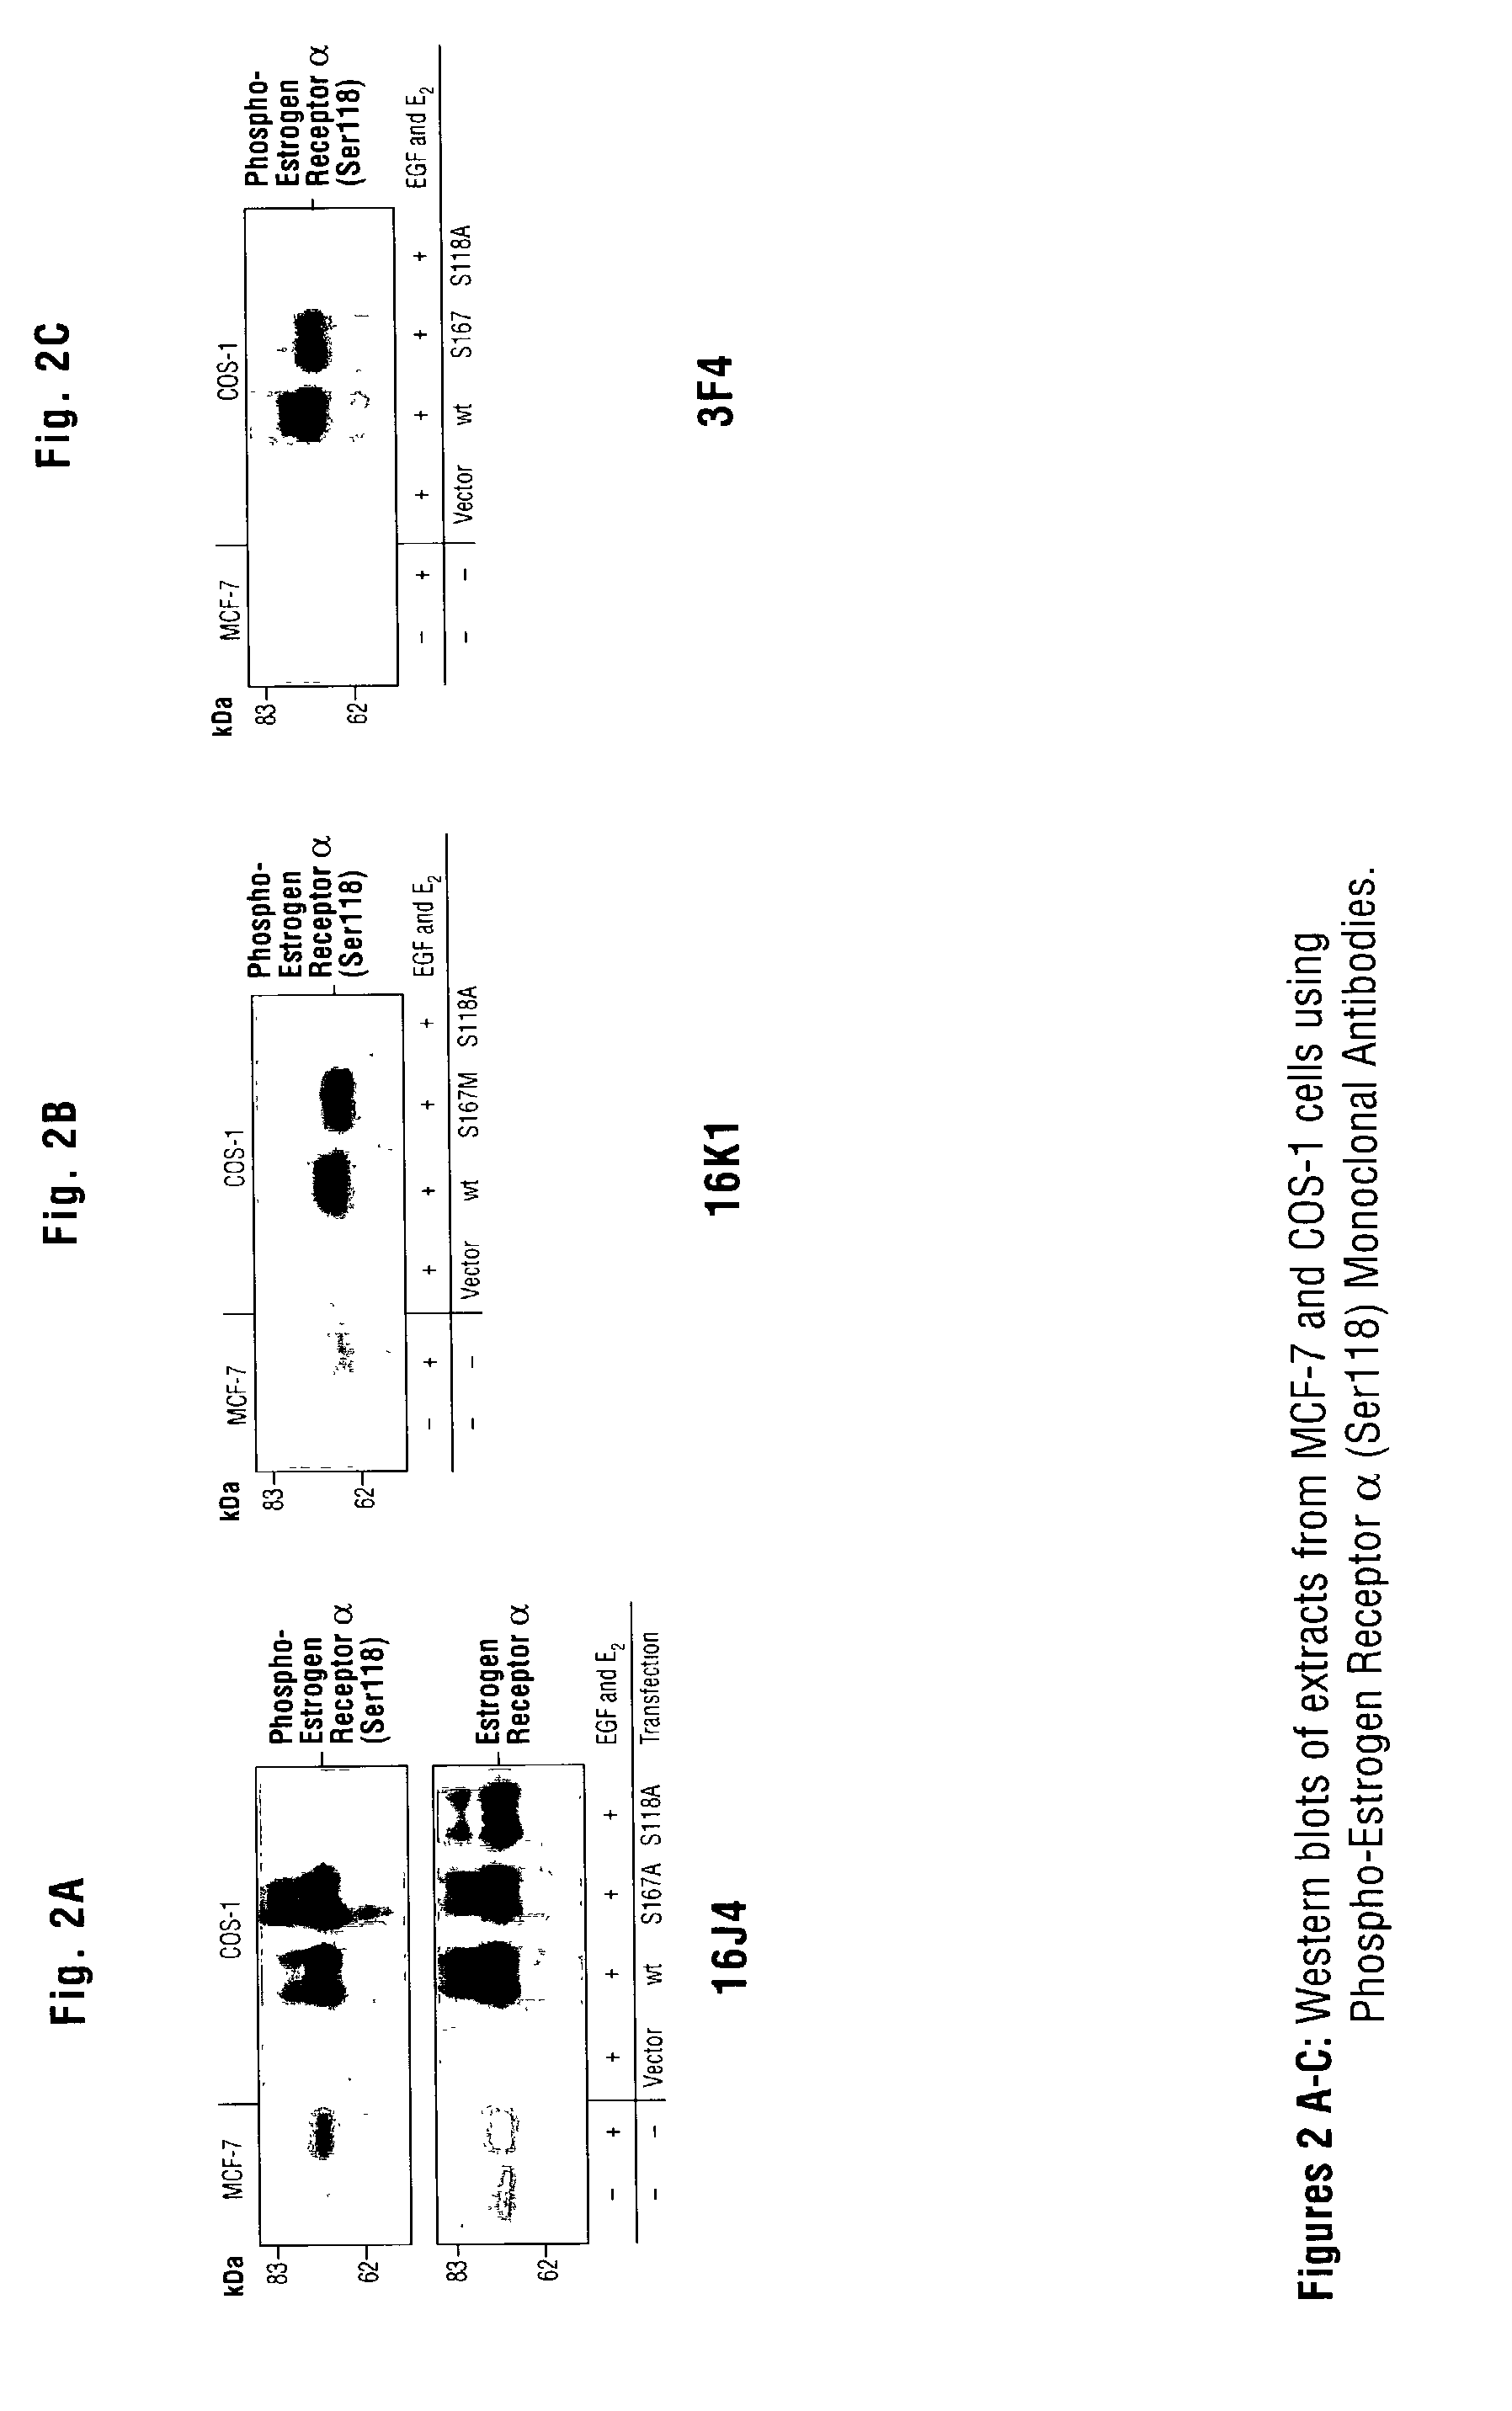 Monoclonal antibodies specific for phosphorylated estrogen receptor alpha (Ser118) and uses thereof